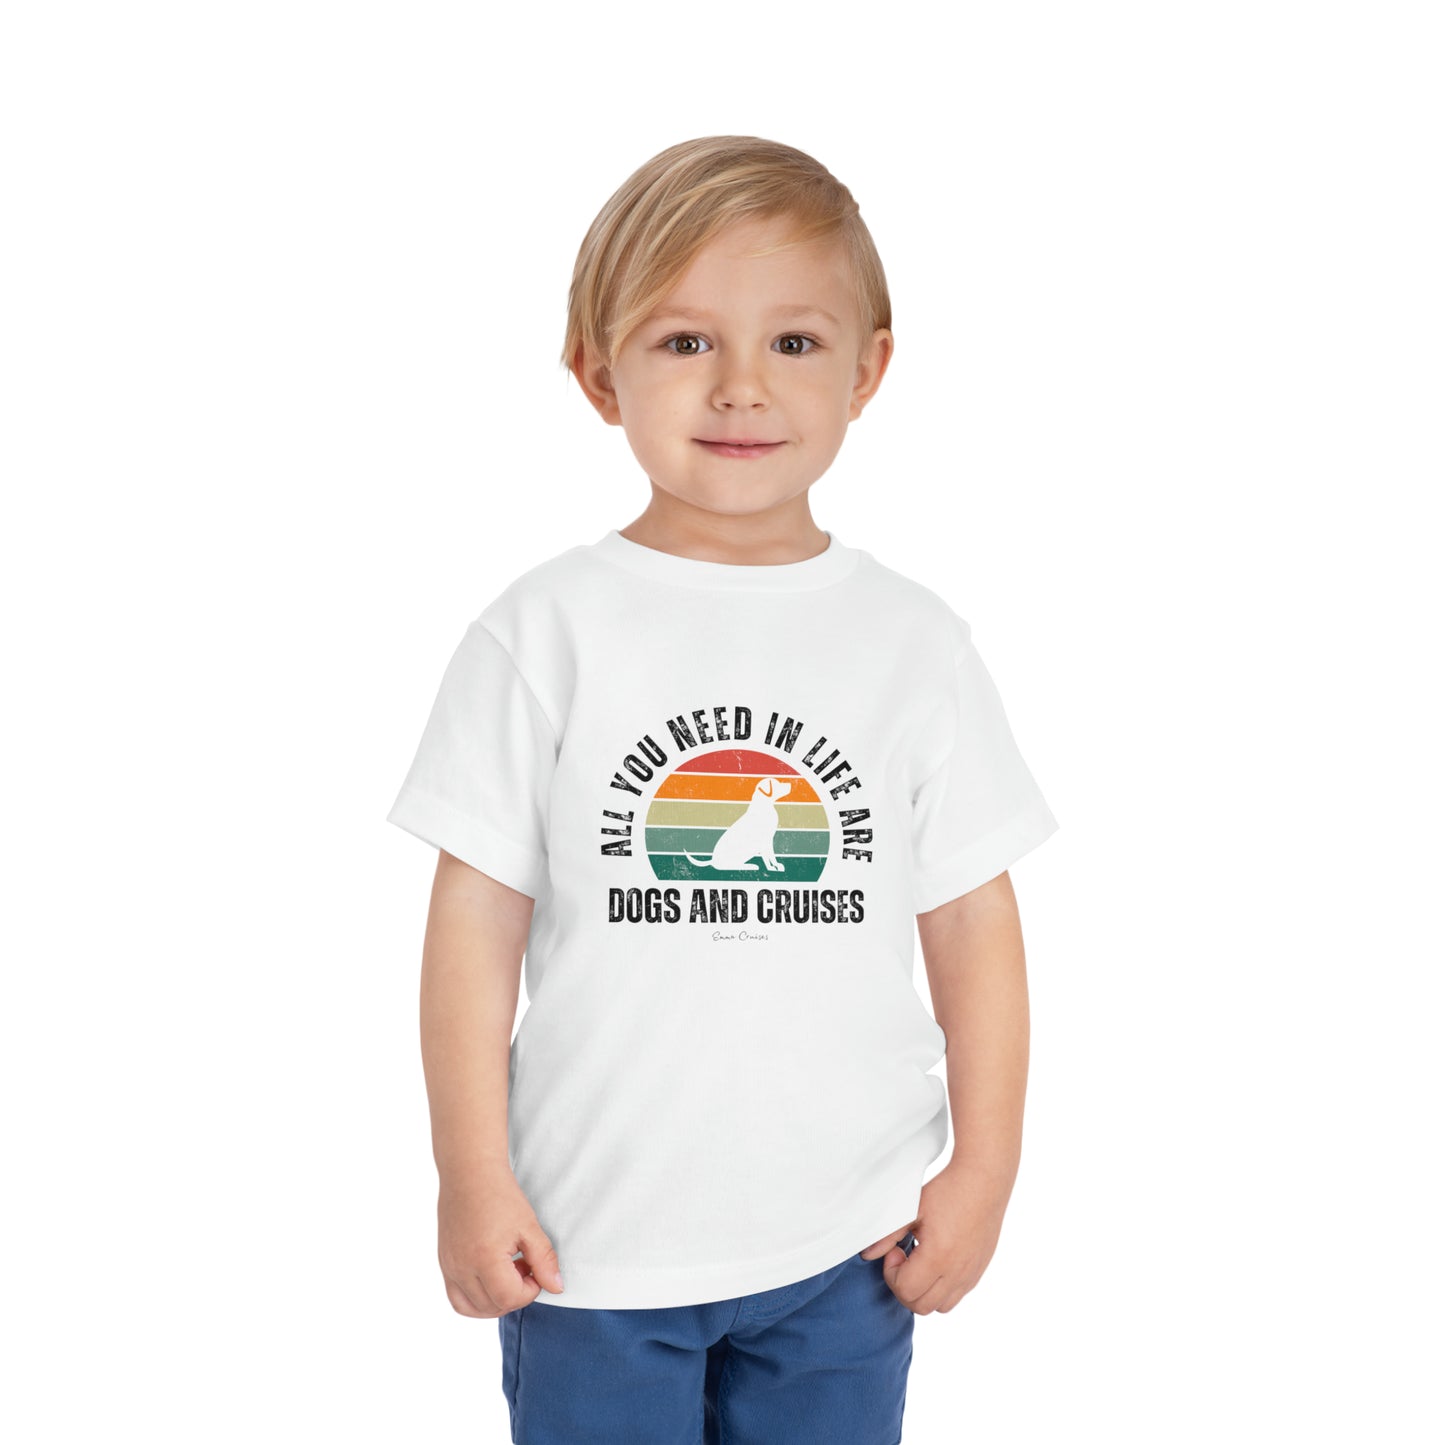 Dogs and Cruises - Toddler UNISEX T-Shirt